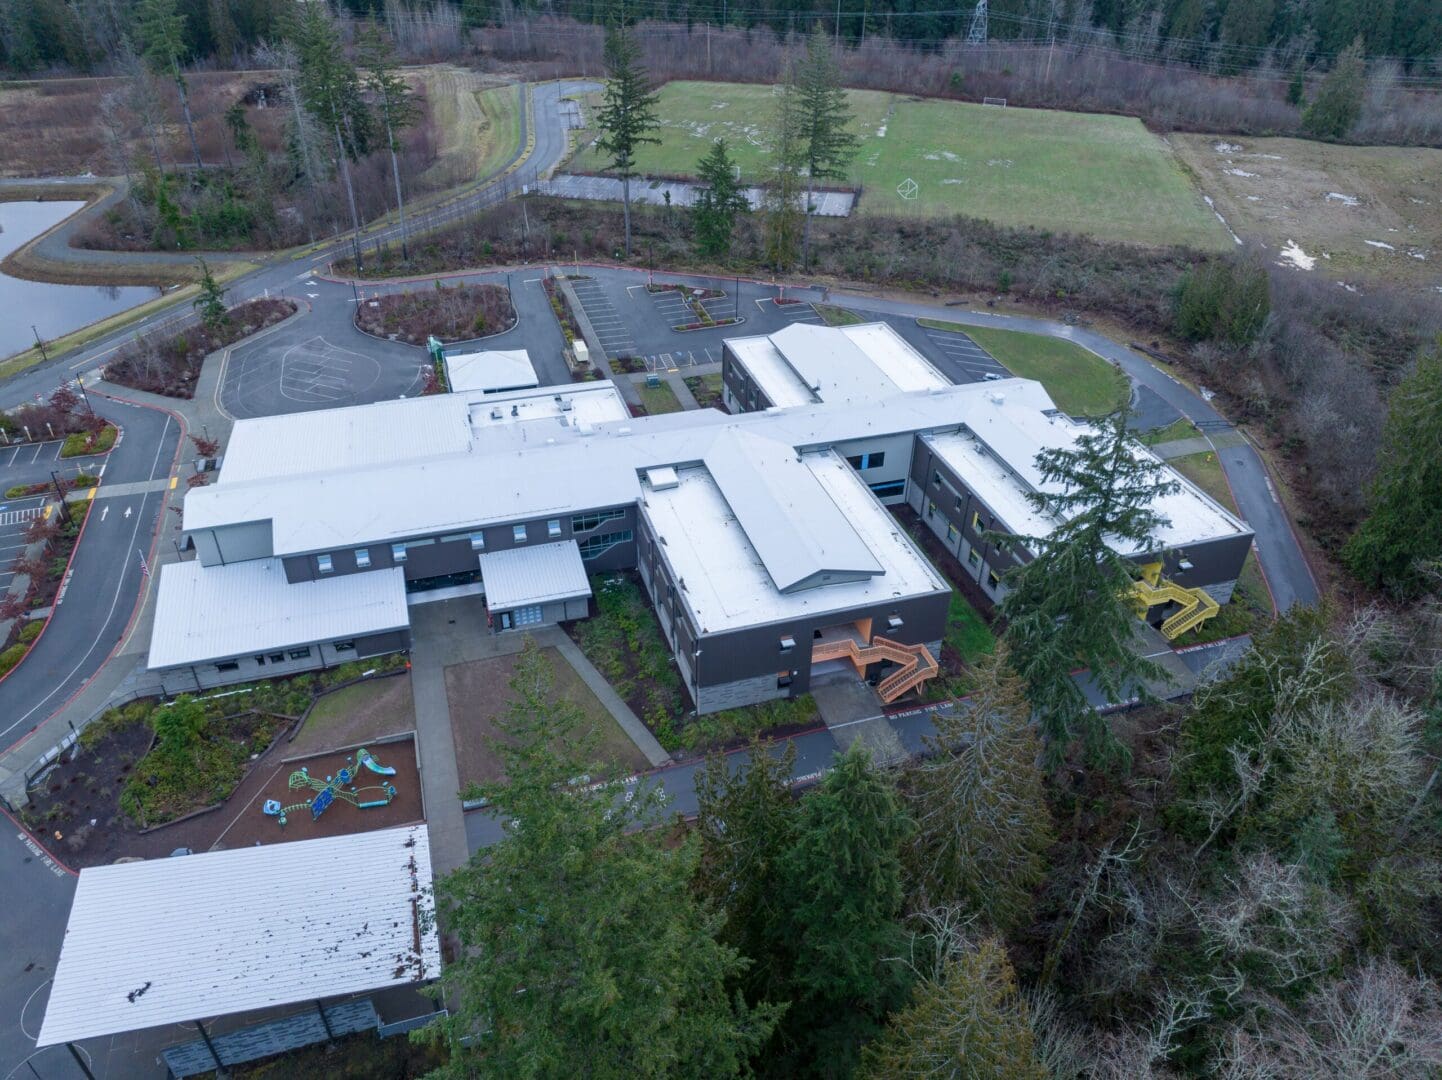 An aerial view of a school building in a forest.